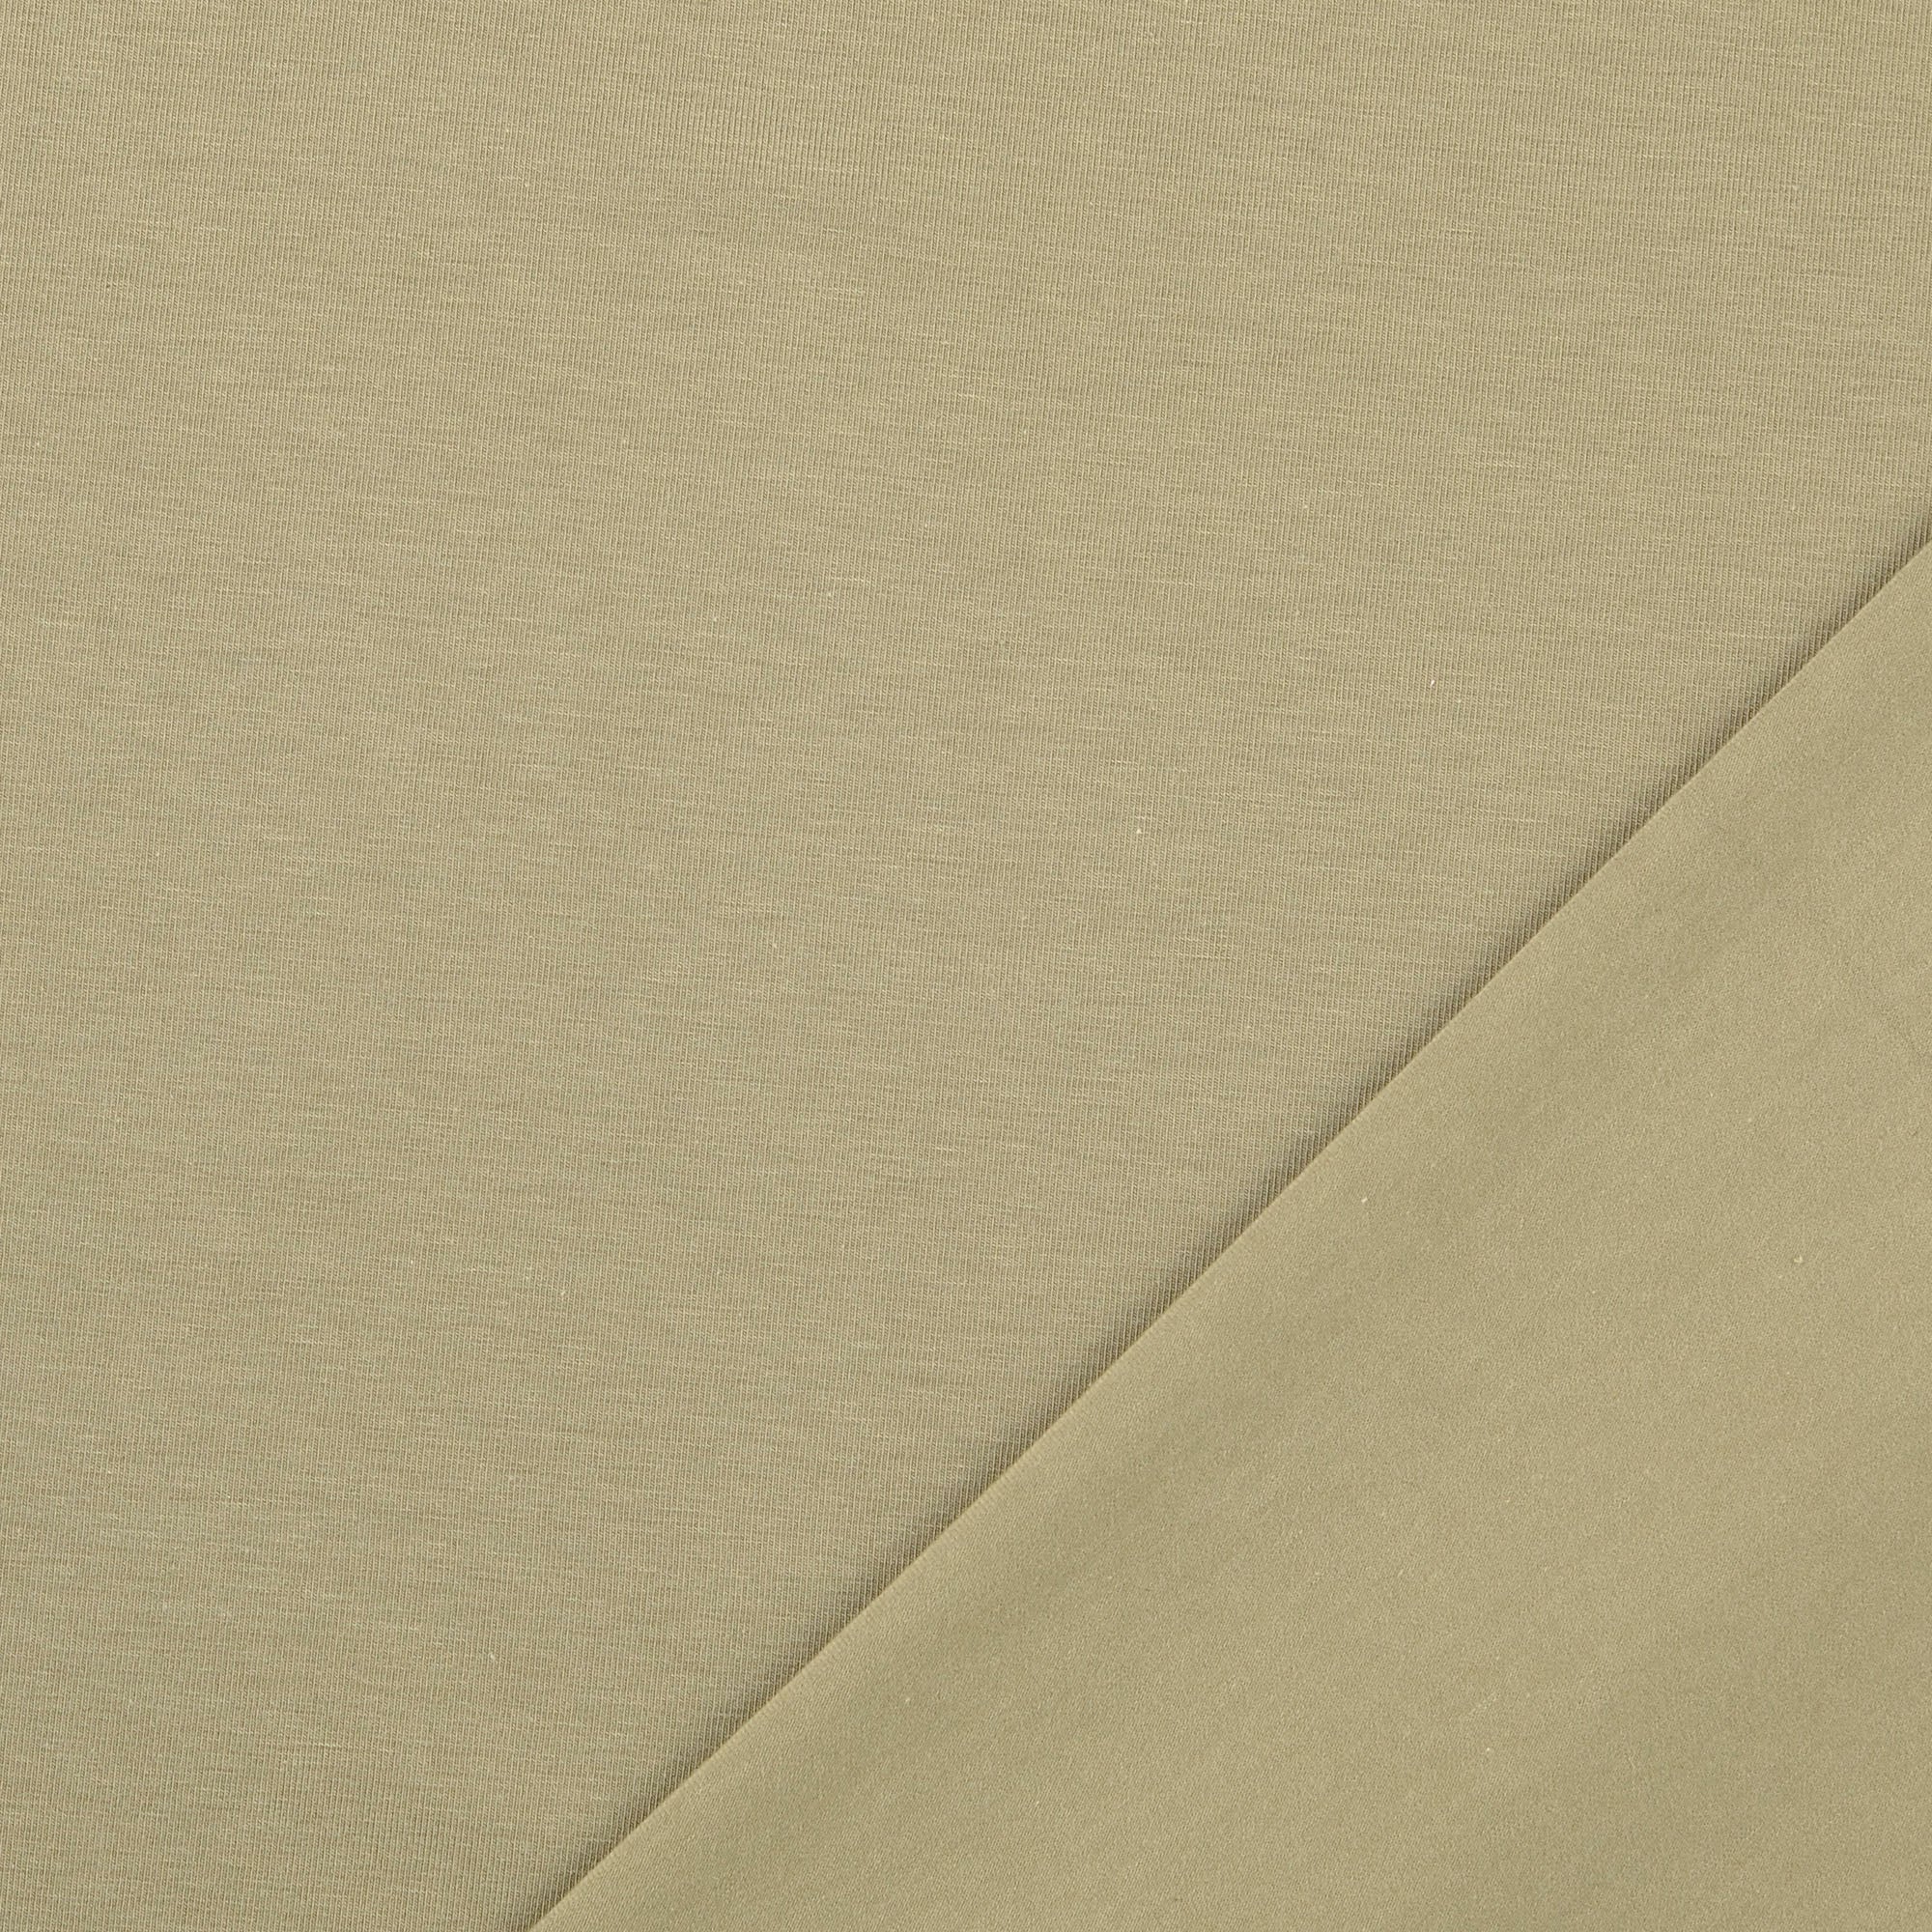 Eco Chic Olive Bamboo Cotton Jersey Fabric